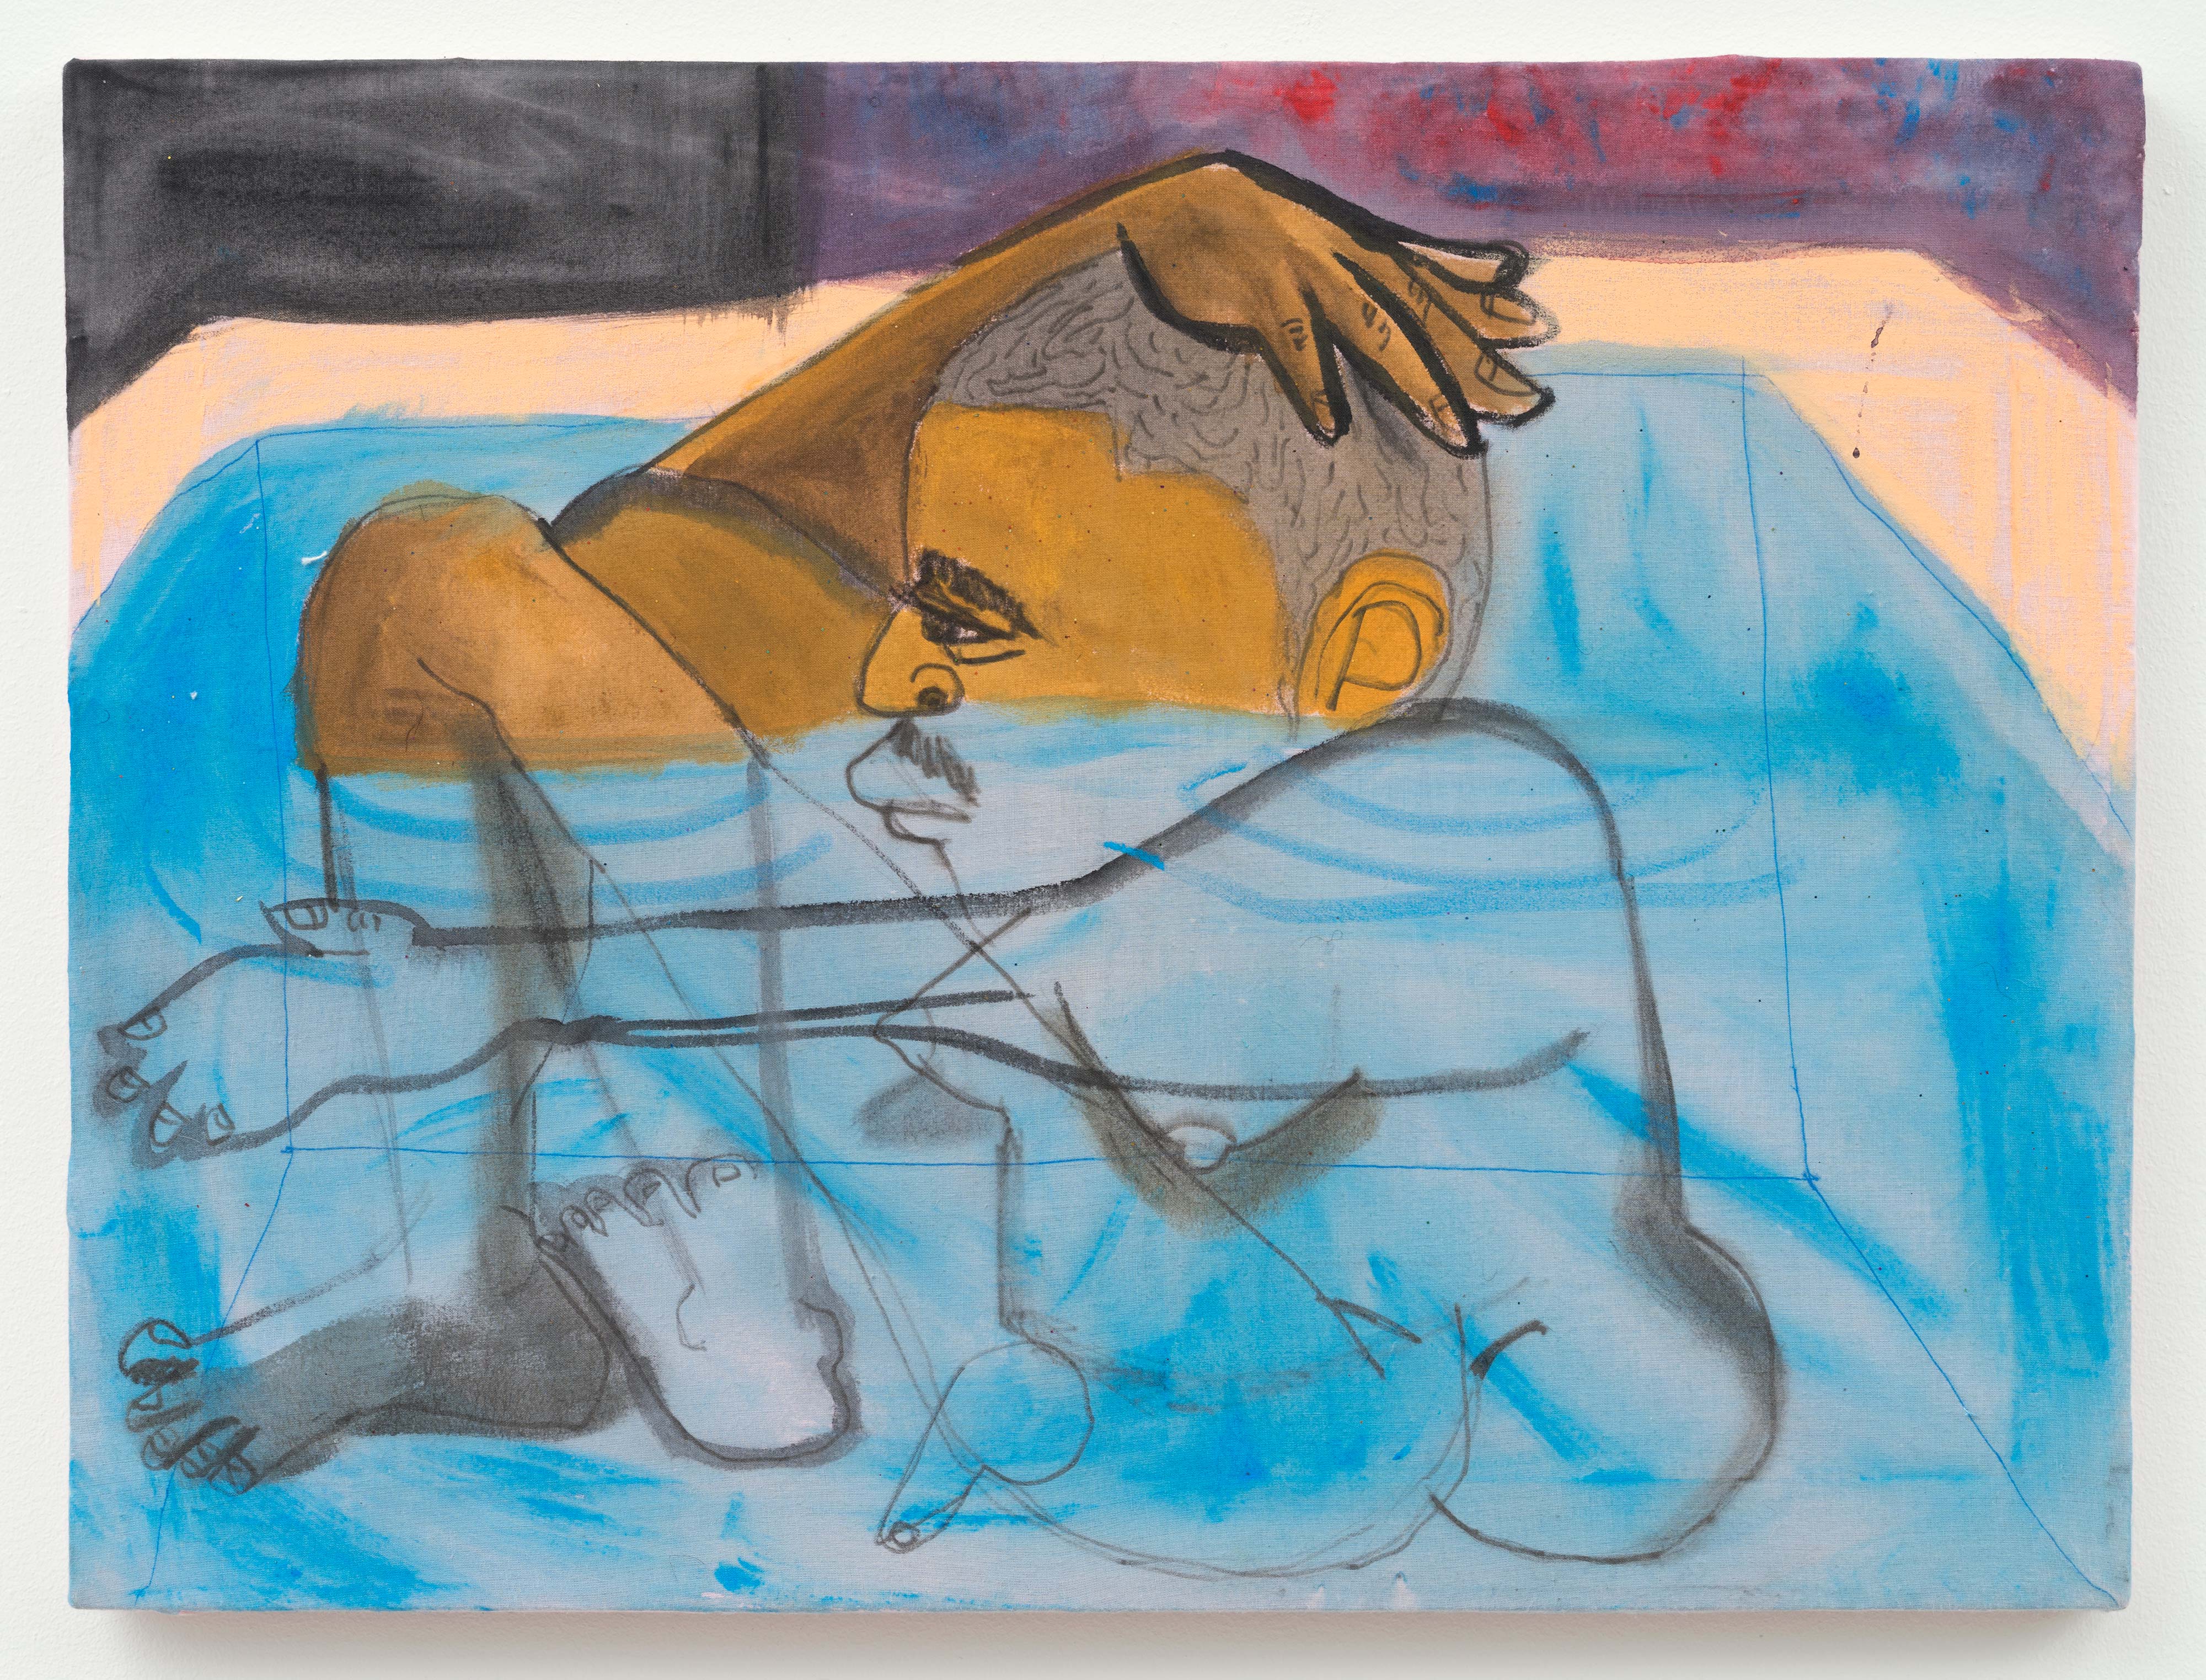 Jonathan Lyndon Chase<br>Man in Tub<br>2015<br>Acrylic and glitter on cotton<br>18 x 24 in (45.72 x 60.96 cm)